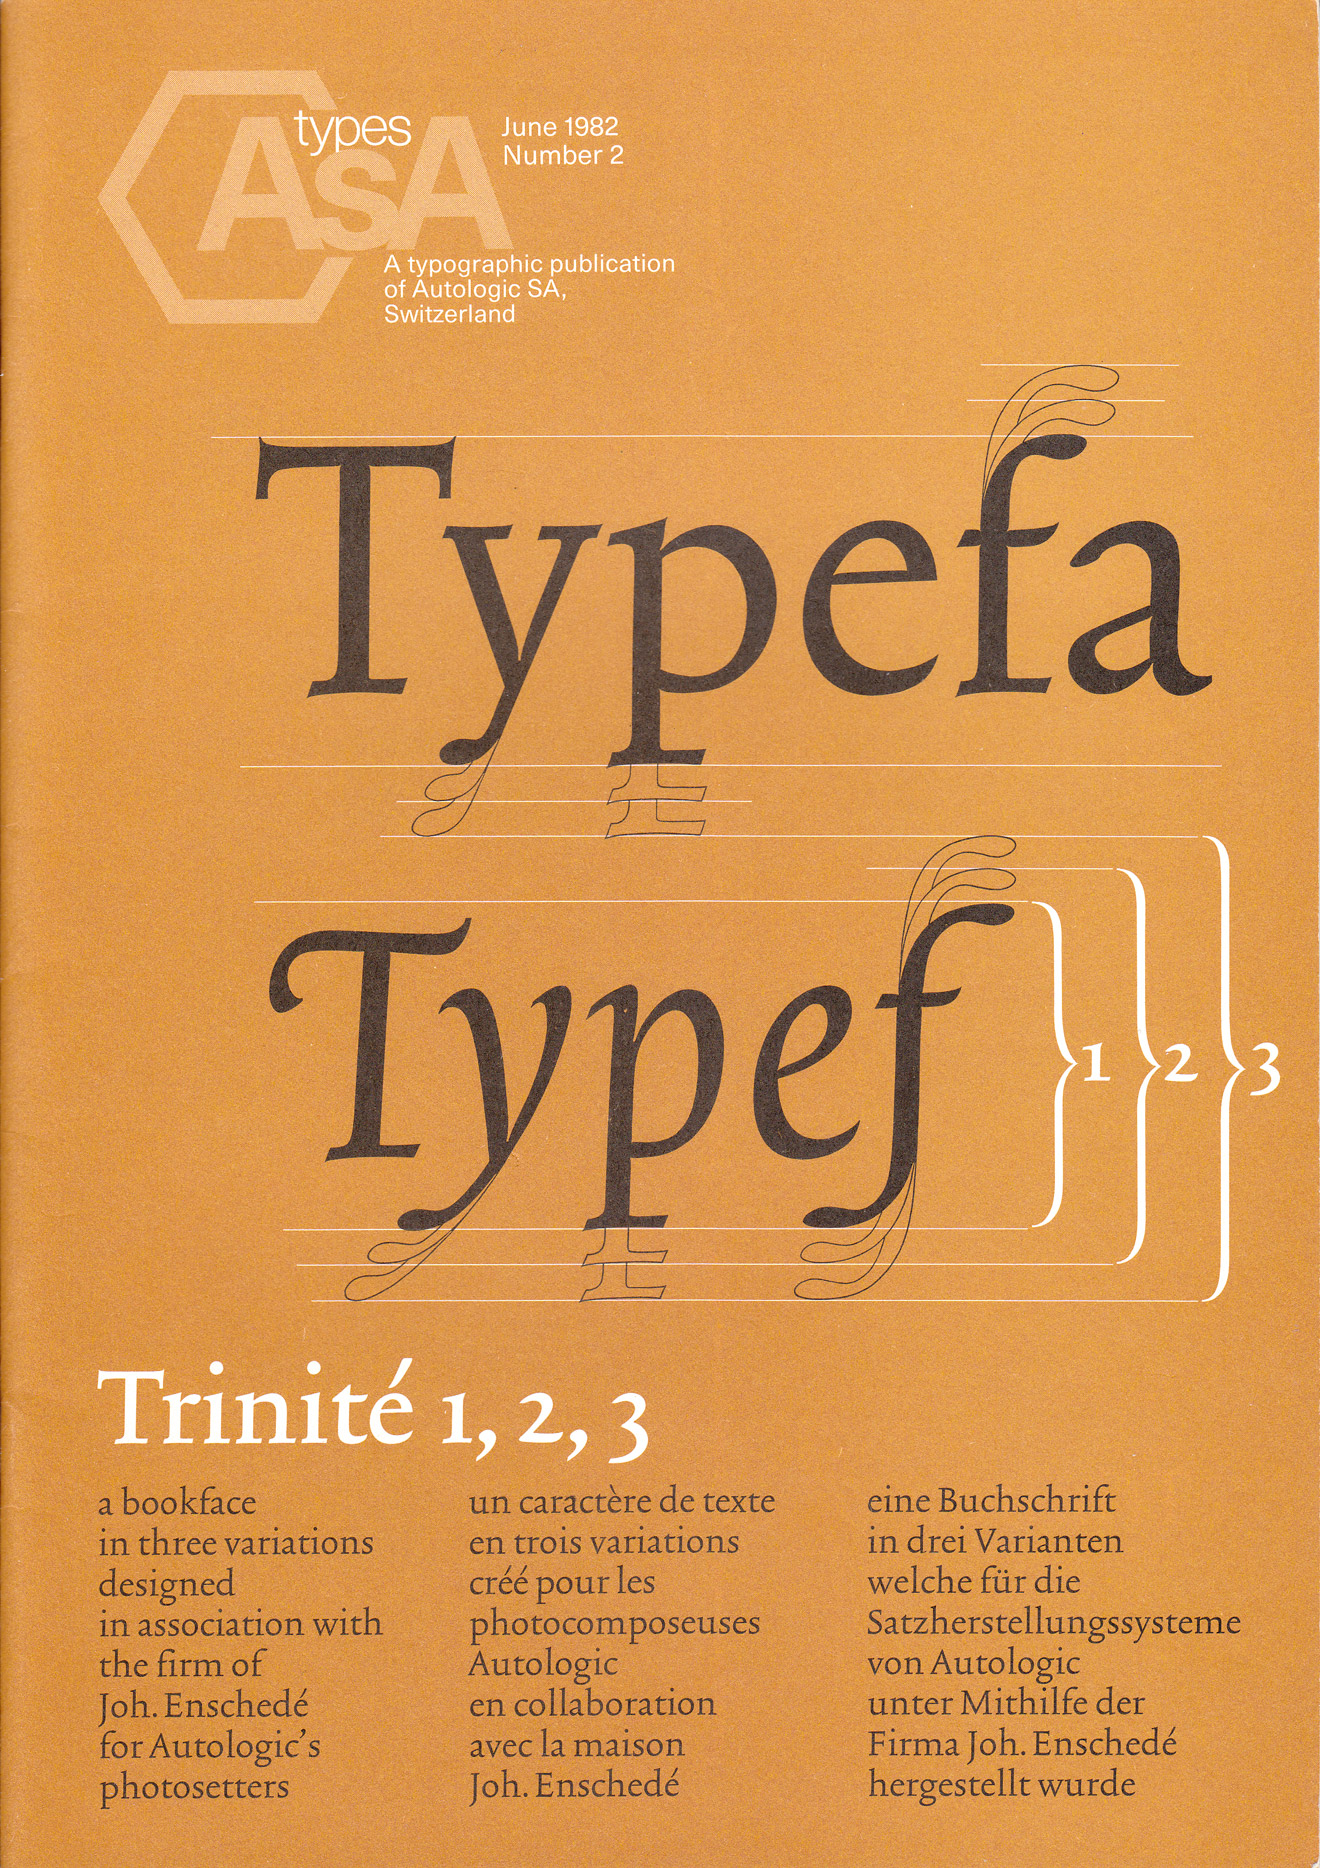 Cover for the June 1982 issue of _types AsA,_ introducing Bram de Does’ Trinité, “a bookface in three variations designed in association with the firm of Joh. Enschedé for Autologic’s photosetters.”